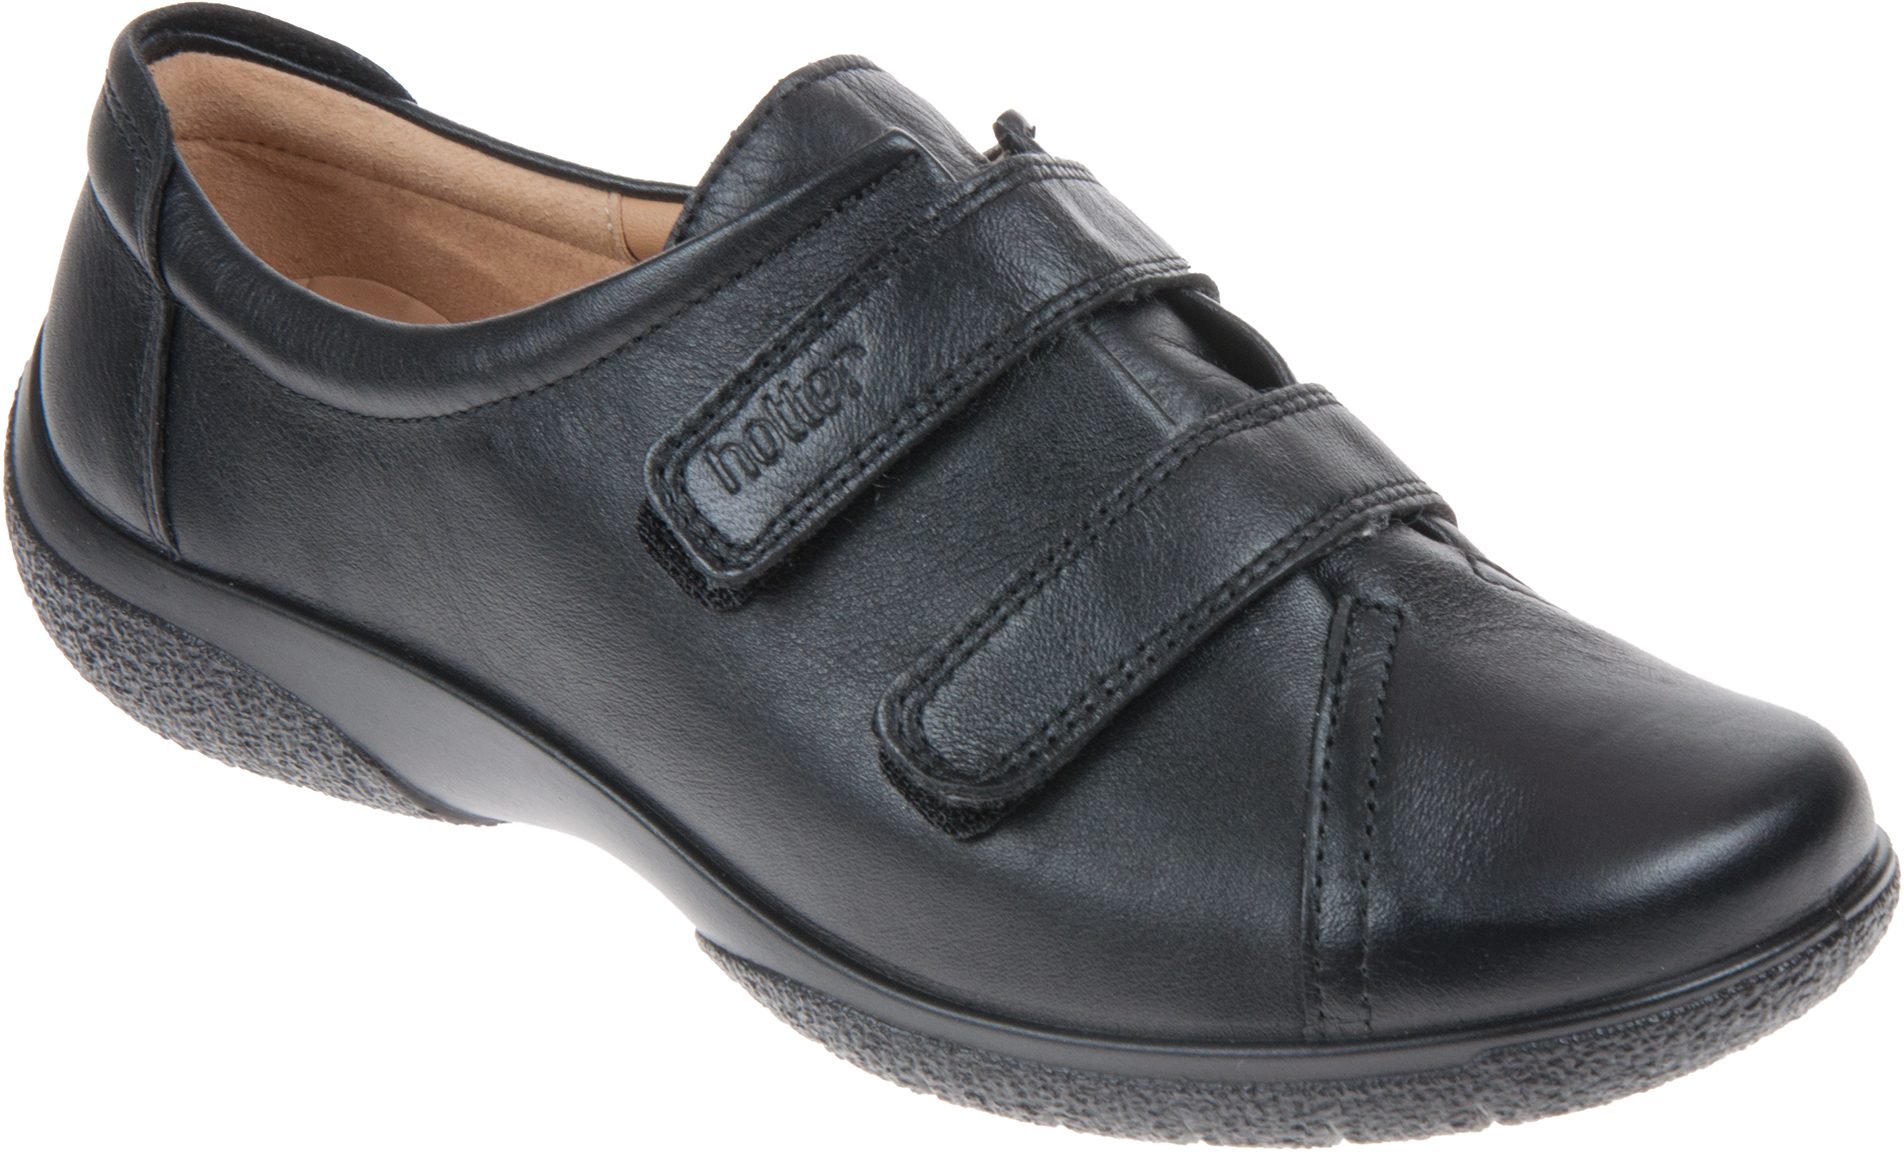 Hotter Leap Jet Black - Everyday Shoes - Humphries Shoes